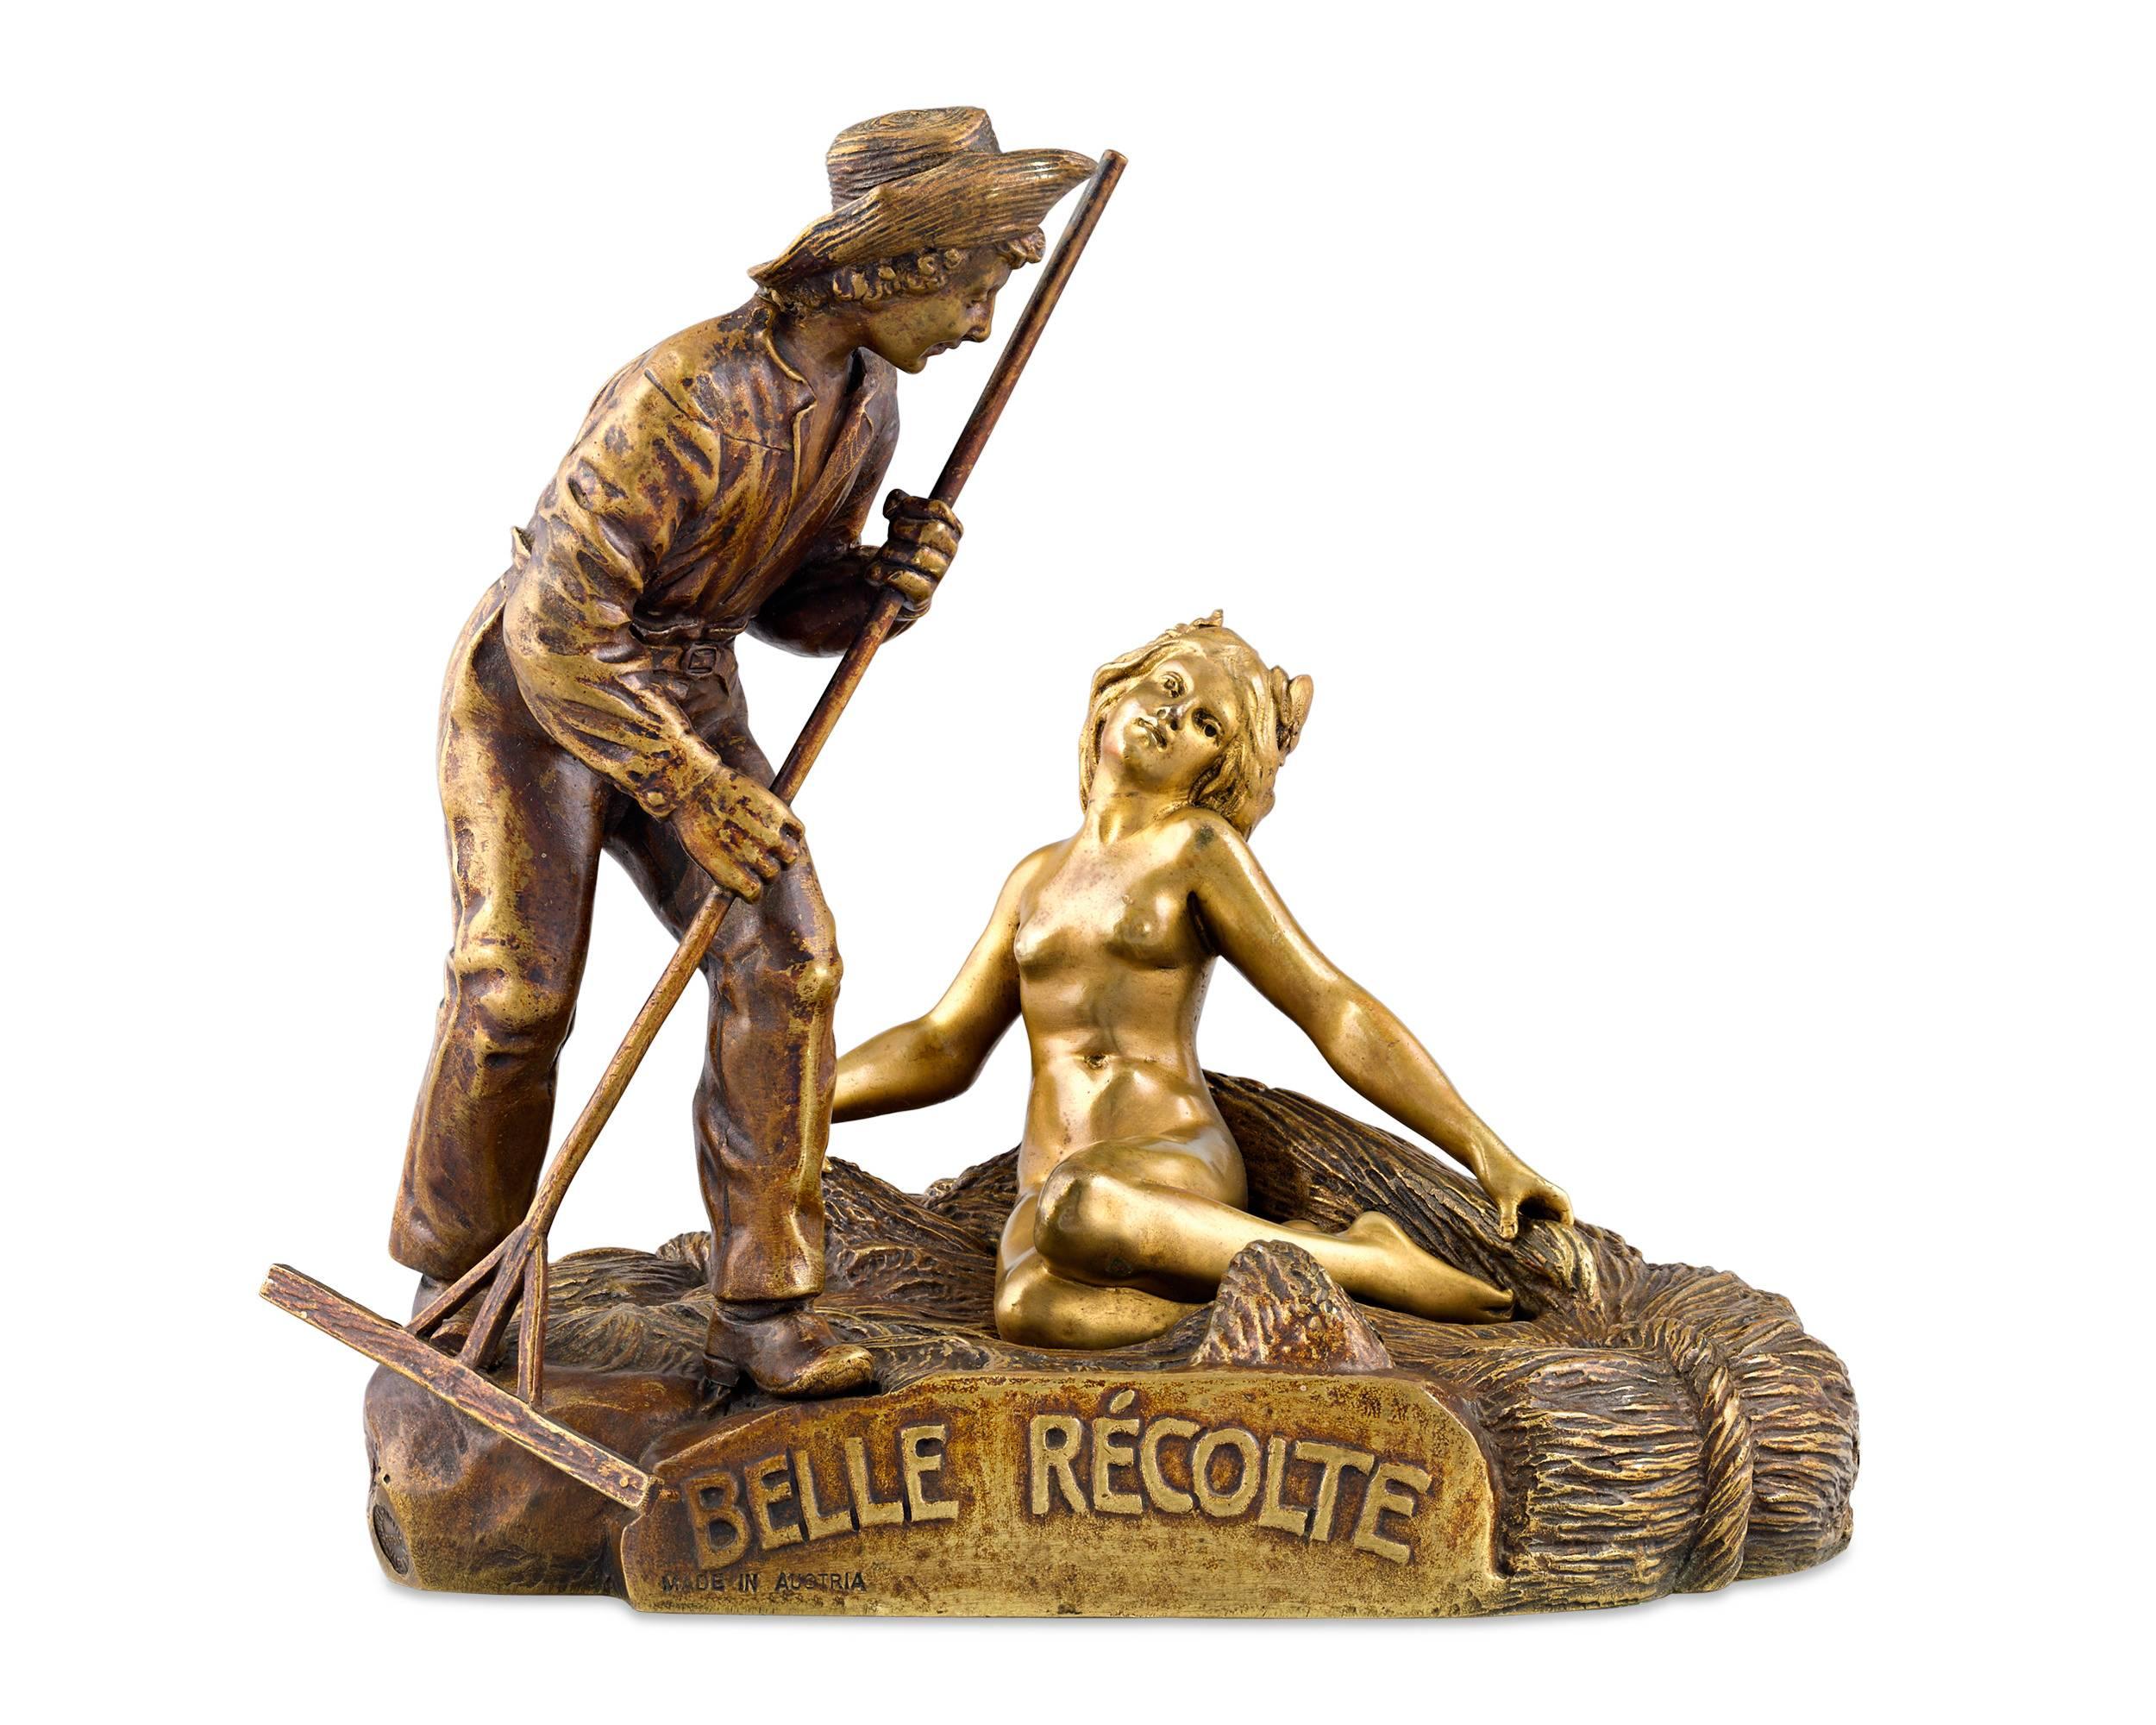 A young man reaping the harvest yields a fruitful surprise in this metamorphic sculpture by Carl Kauba. The engraving on the base, Belle Récolte (Beautiful Harvest), hints at the nude maiden who is hidden beneath the hay. Crafted of patinated and